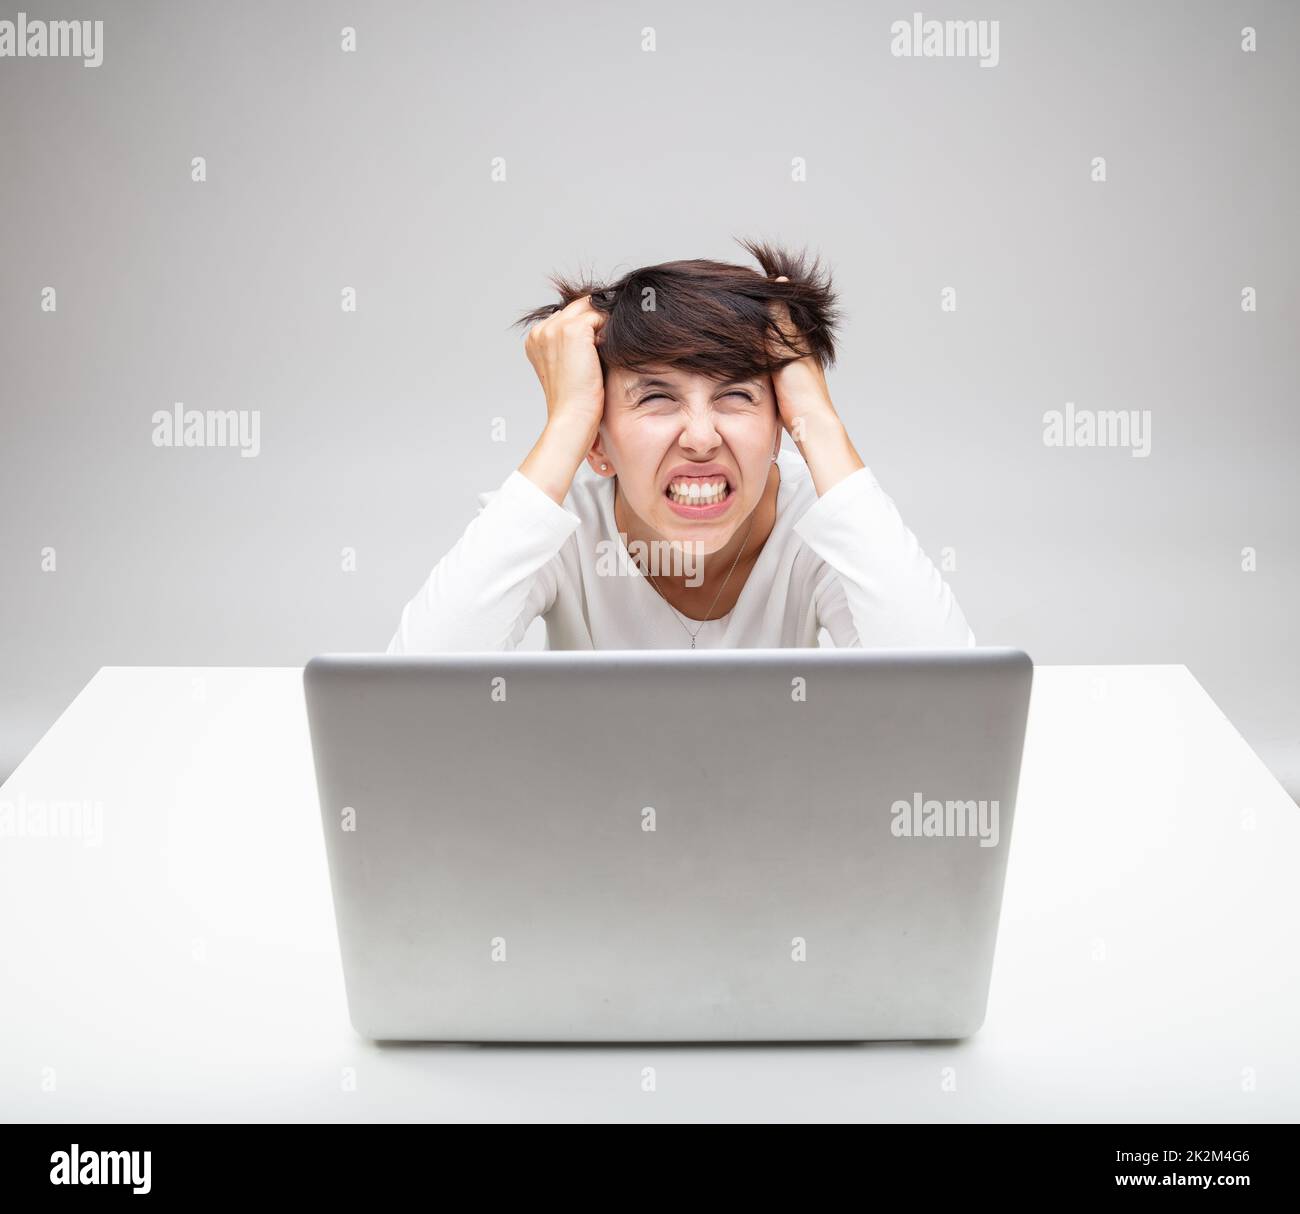 Frustrated businesswoman tearing at her hair Stock Photo